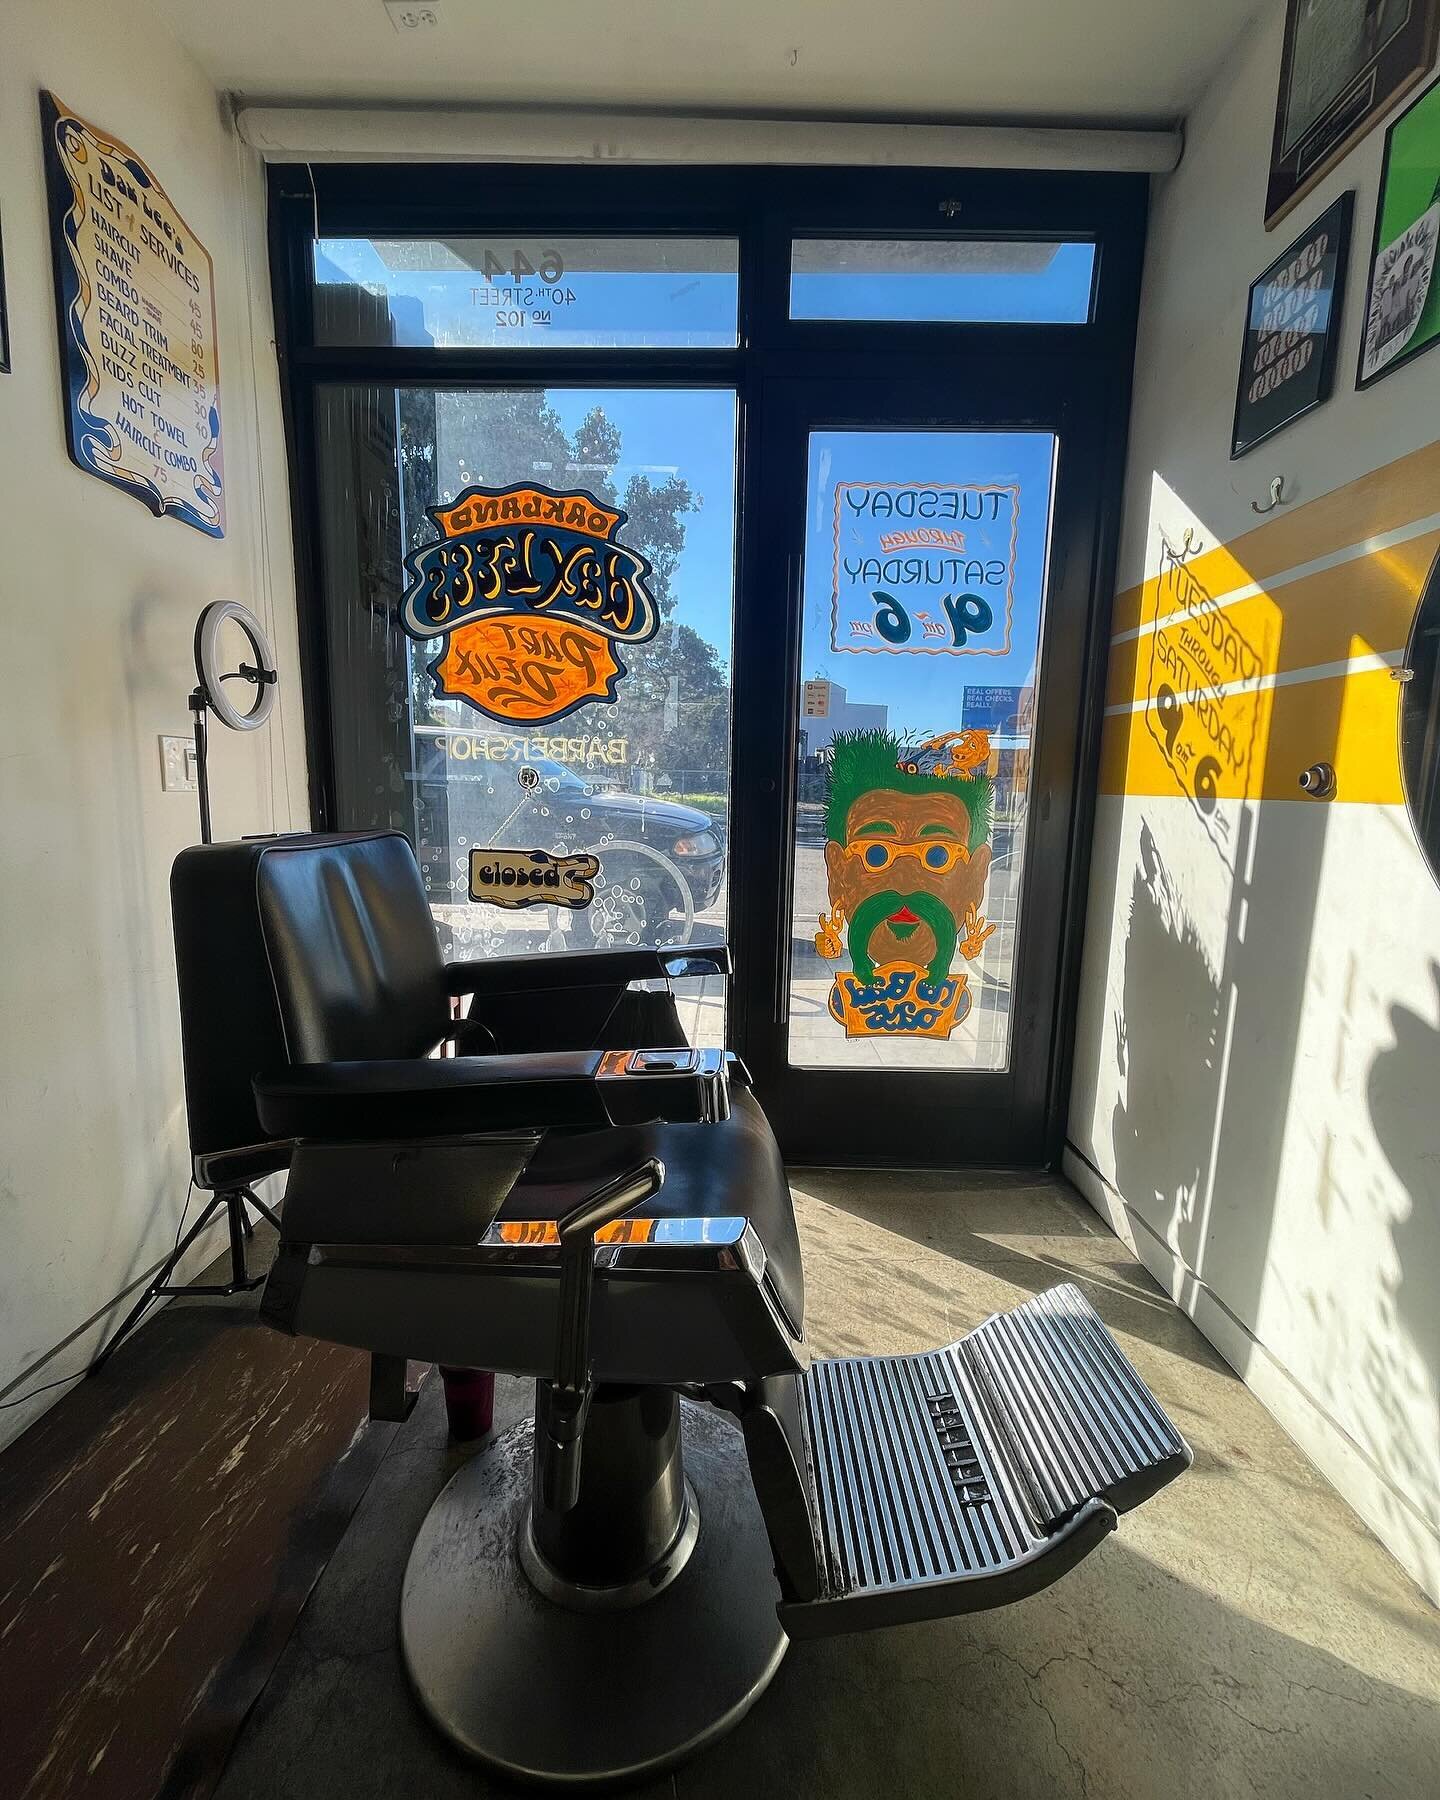 I&rsquo;m so dang grateful to be joining the amazing team @daxleesbarbershop in #Oakland. It&rsquo;s a dream come true to finally be behind a chair cutting some hair. 💈 

I believe in the power of community and conversation. And a good haircut. Come